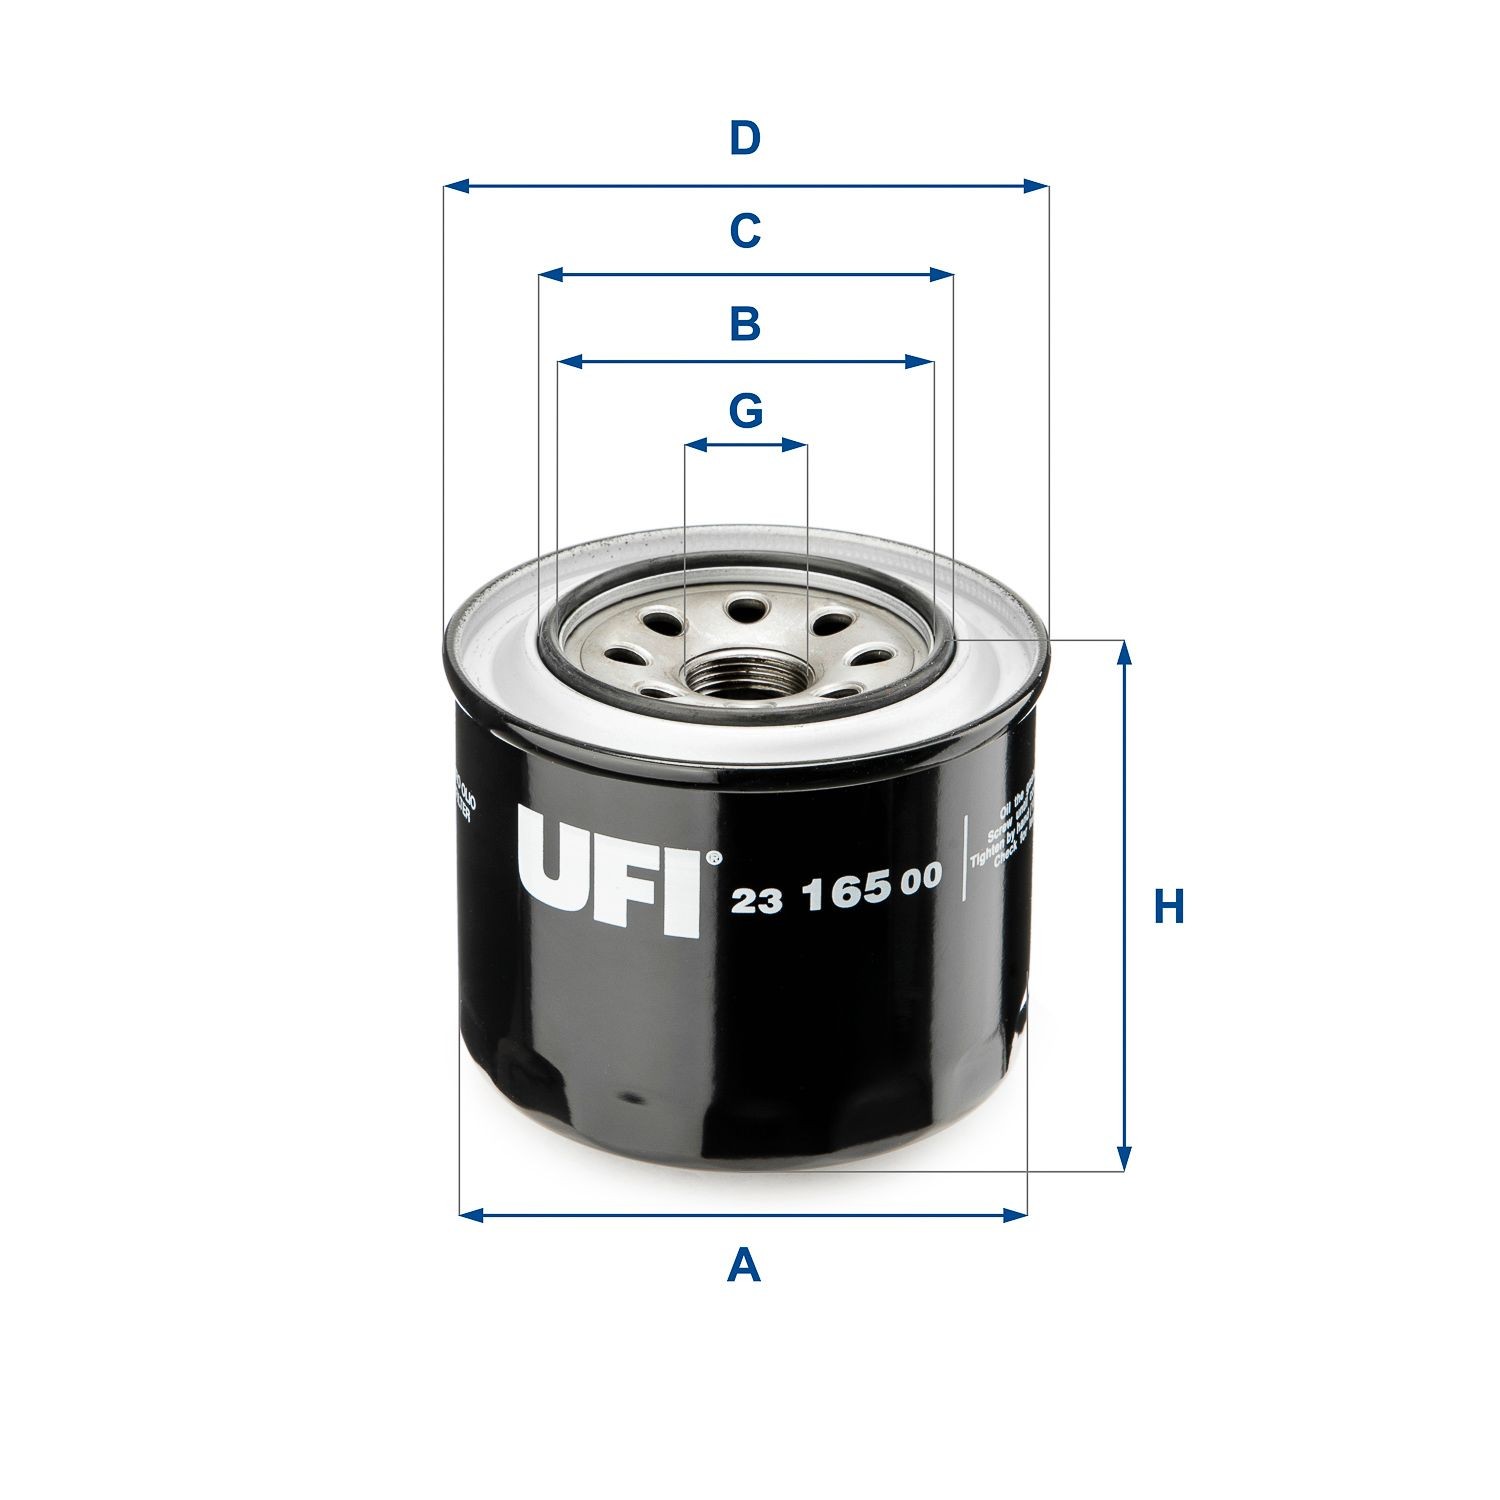 23.165.00 UFI Oil filters MITSUBISHI M 20 X 1,5, with one anti-return valve, Spin-on Filter